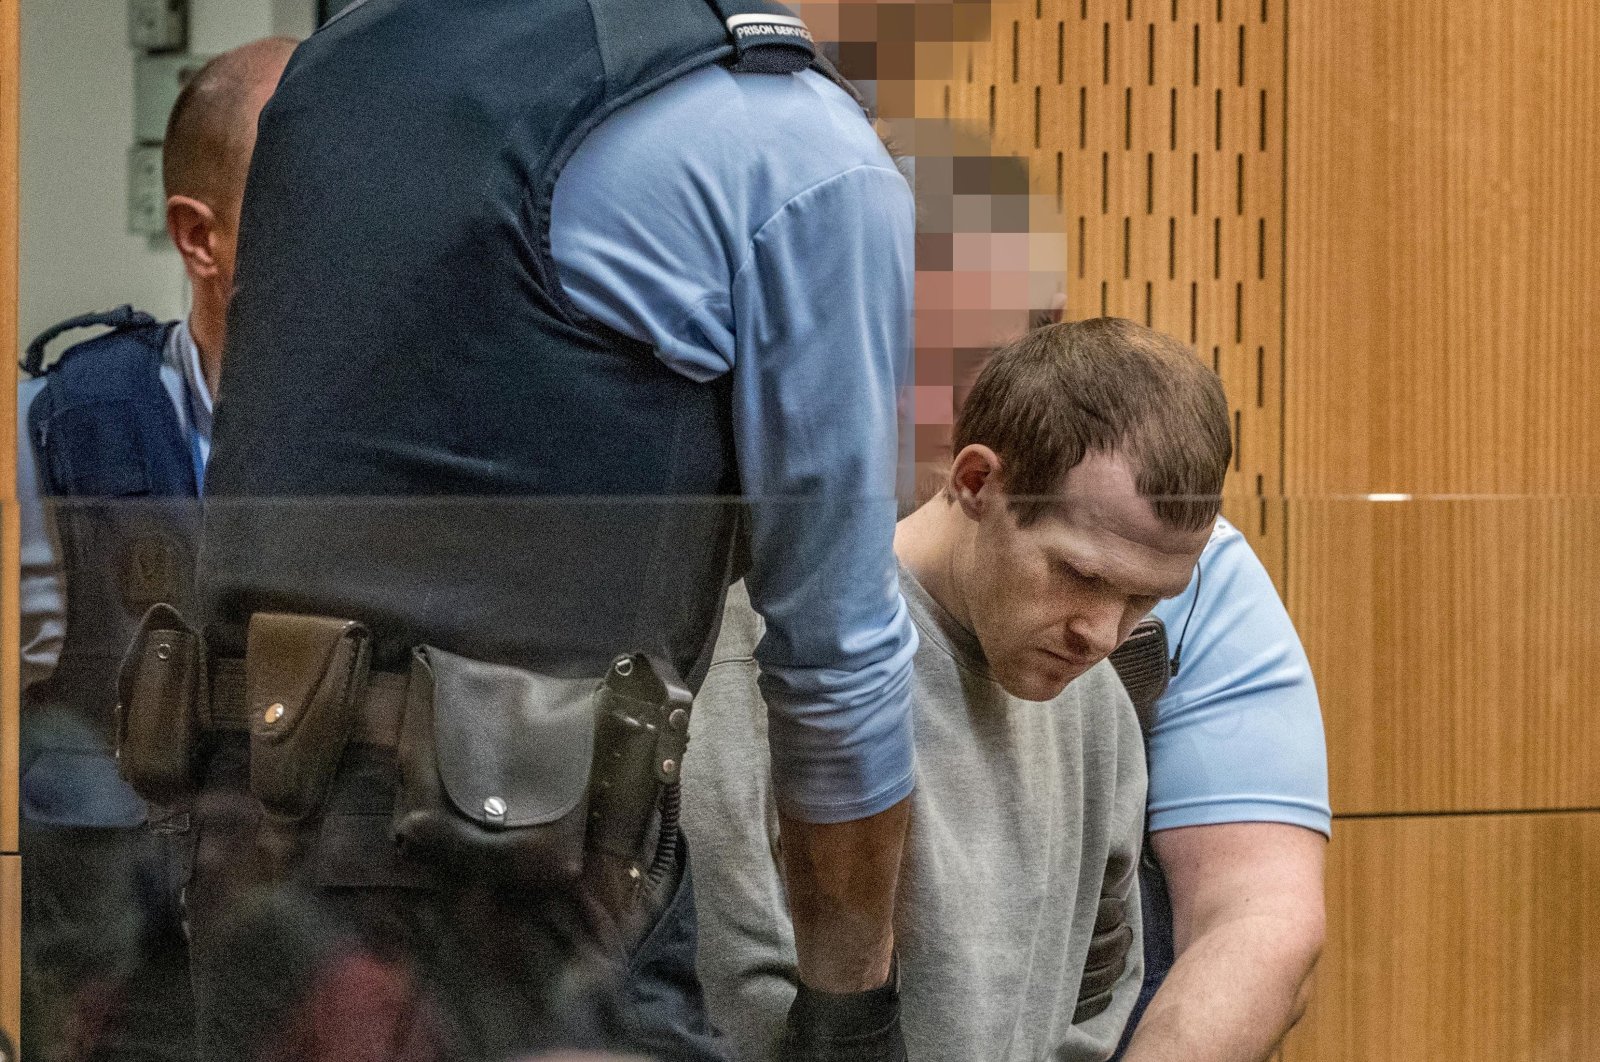 Brenton Tarrant, who shot and killed worshippers in the Christchurch mosque attacks, is seen during his sentencing at the High Court in Christchurch, New Zealand, Aug. 25, 2020. (REUTERS Photo)